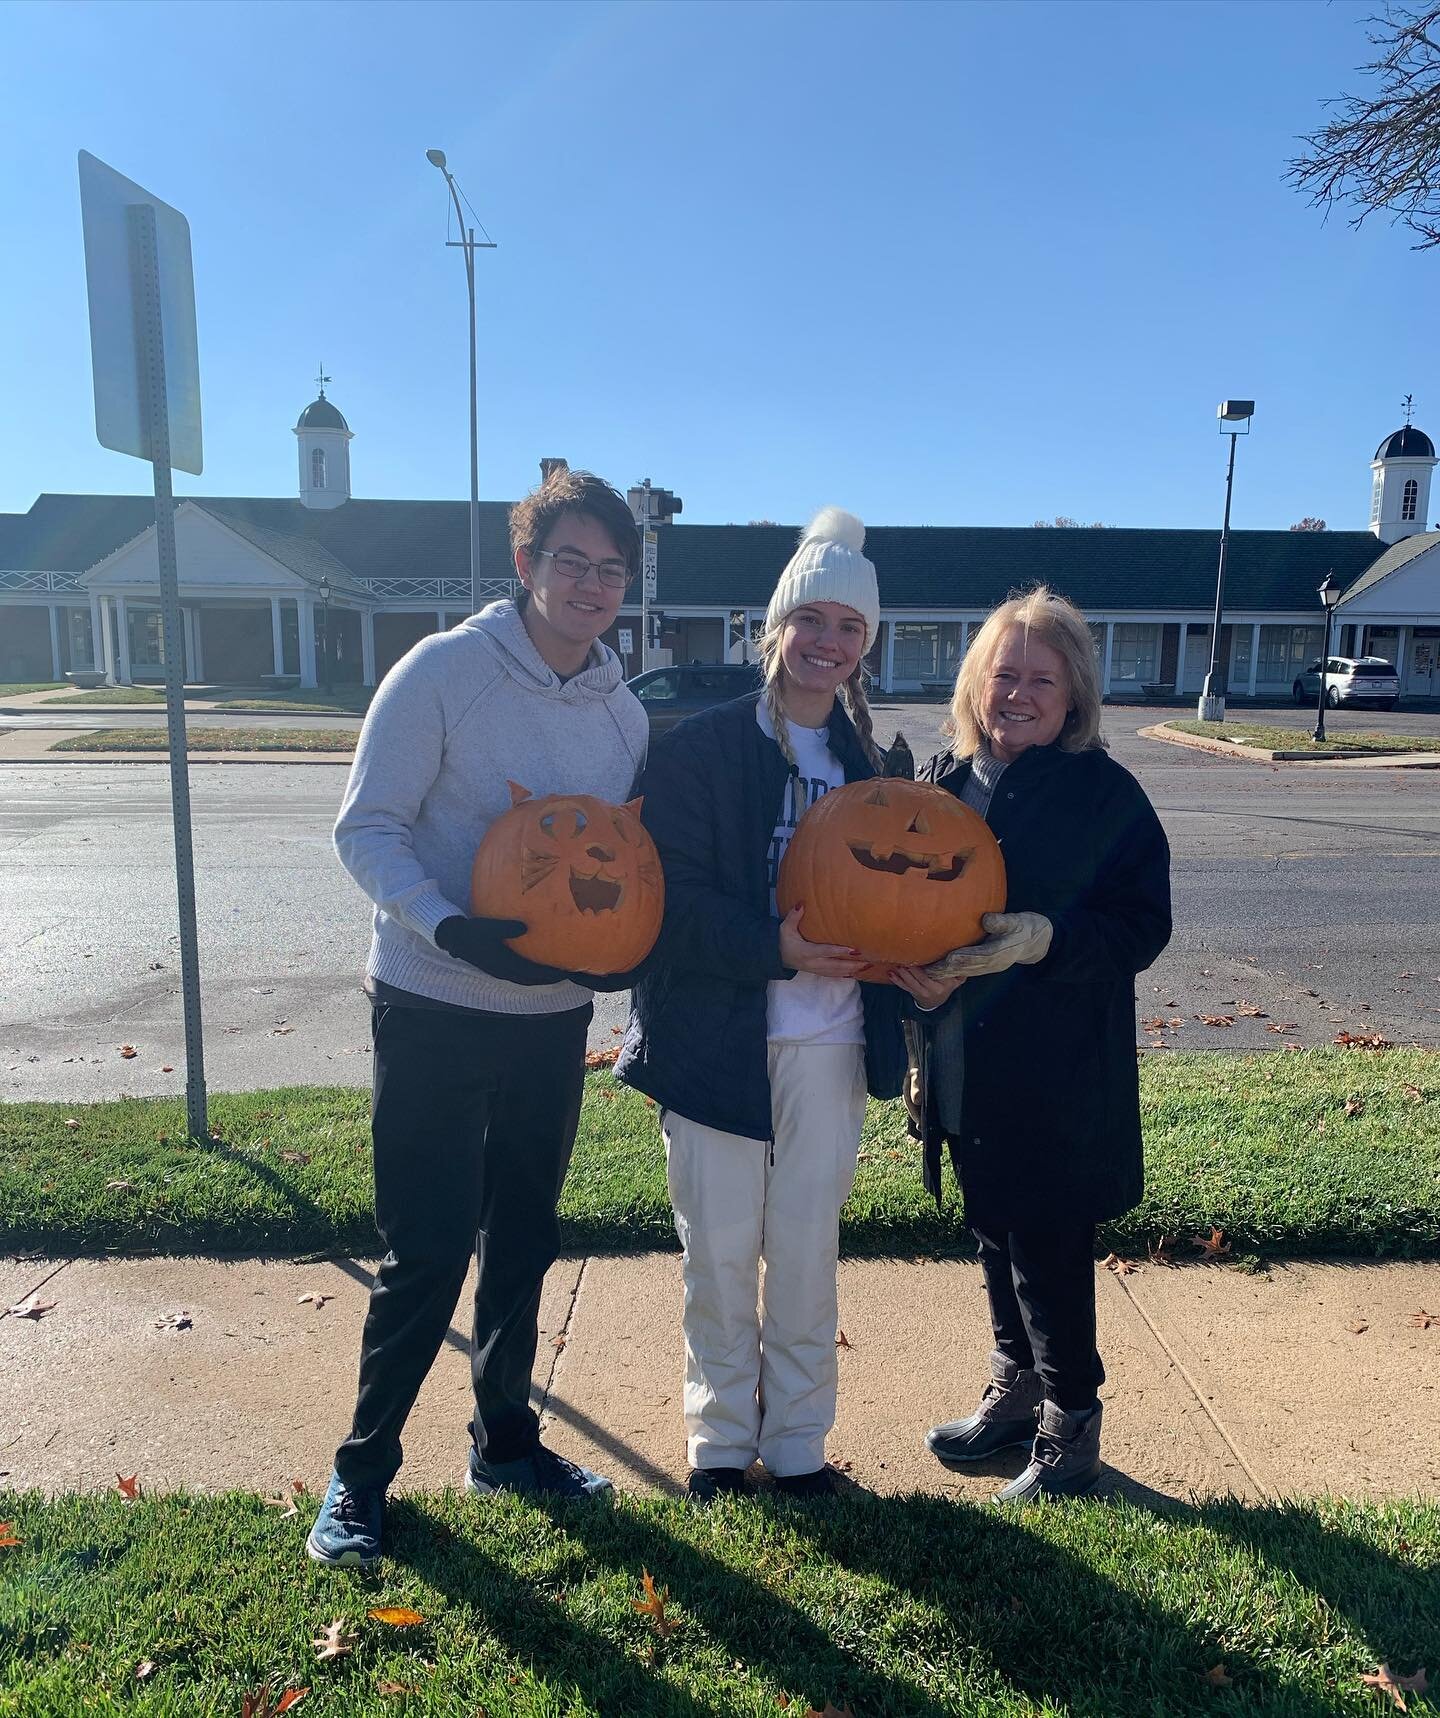 Pumpkin Drop Off Day!!!! 🎃🎃🎃🎃
Save your pumpkins from the landfill at any of our three locations today before 2pm:
Corinth Square- 83rd &amp; Mission
Lakeside Nature Center- 4701 Gregory
KC Can Compost- 3119 Terrace Street

@corinth_square 
#comp